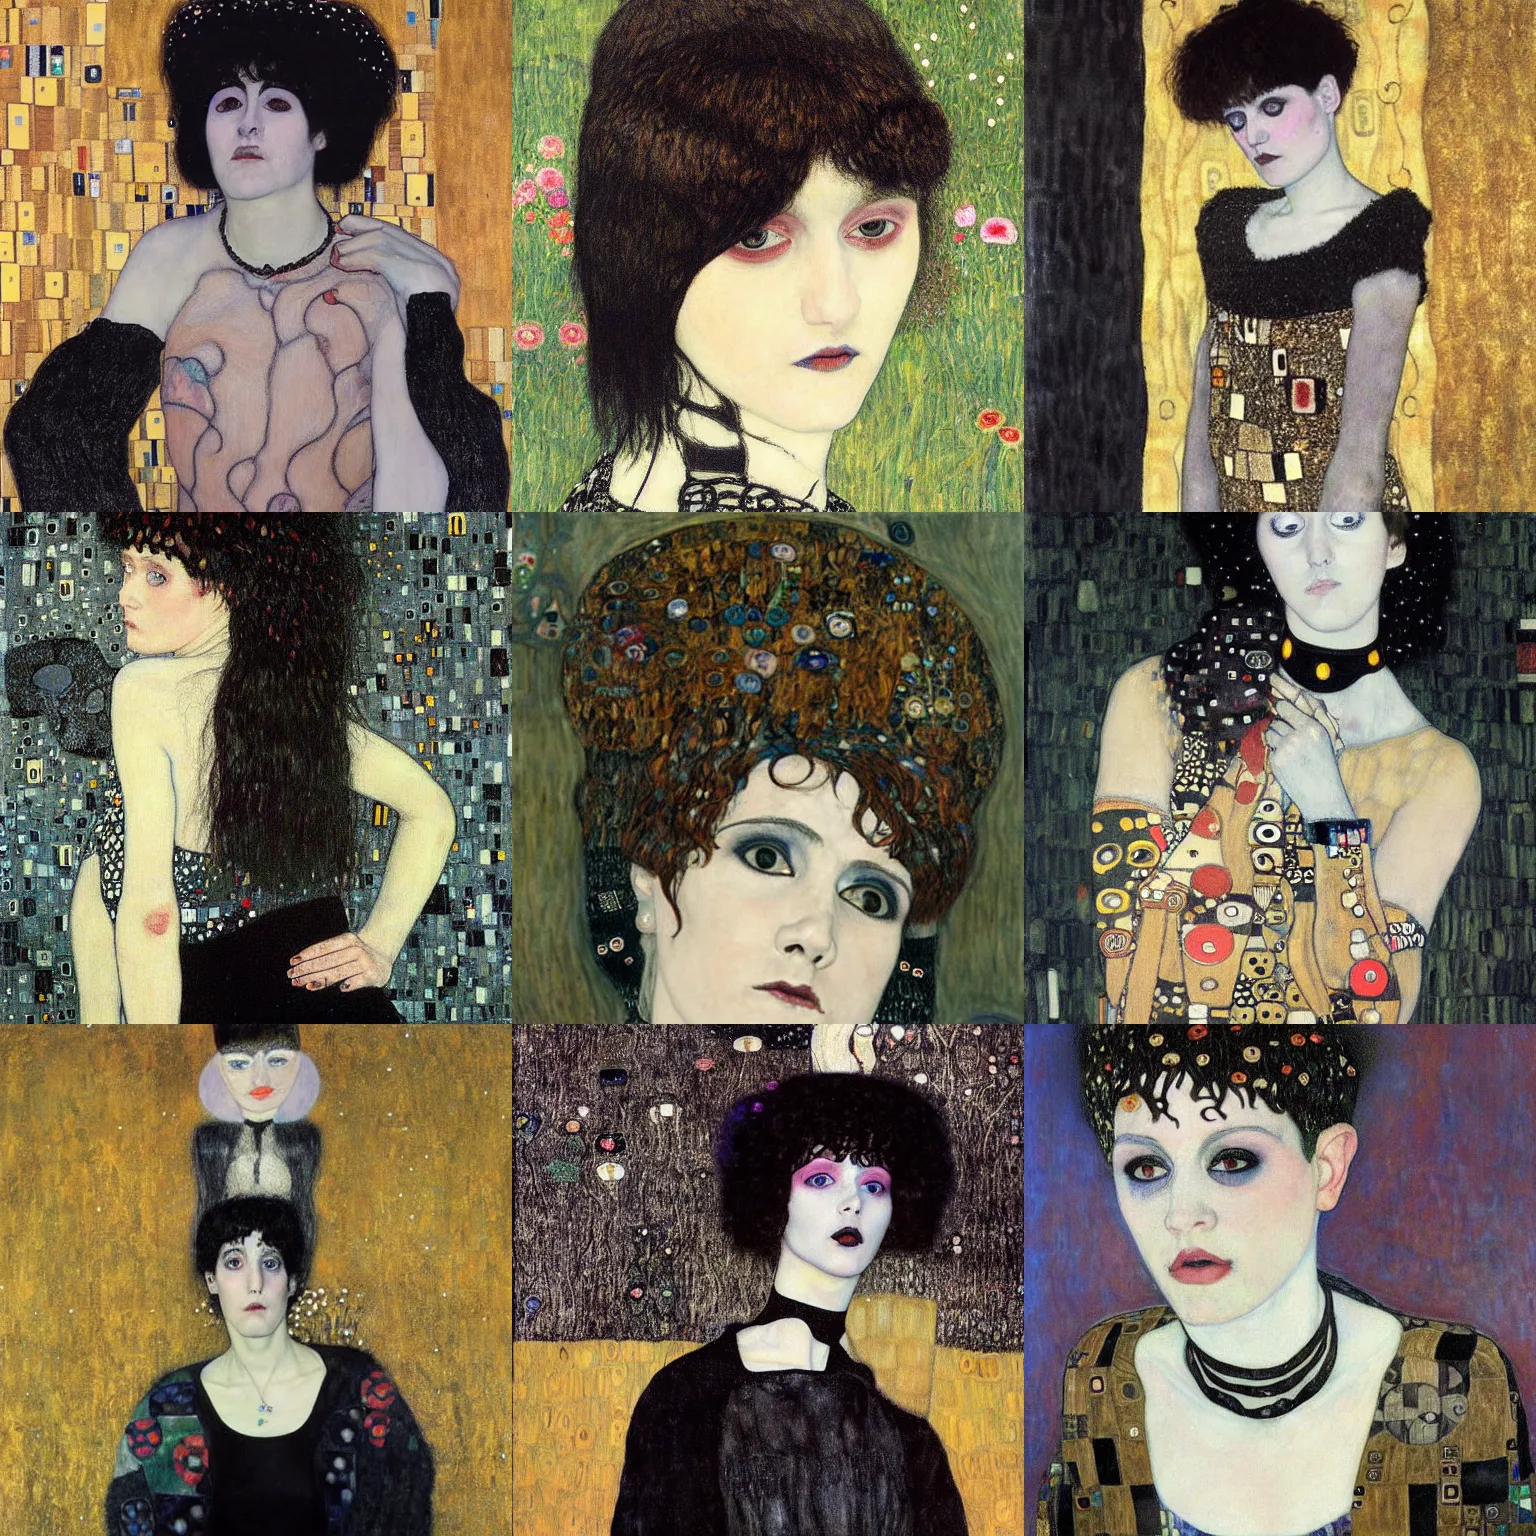 Prompt: A goth painted by Gustav Klimt. Her hair is dark brown and cut into a short, messy pixie cut. She has a slightly rounded face, with a pointed chin, large entirely-black eyes, and a small nose. She is wearing a black tank top, a black leather jacket, a black knee-length skirt, a black choker, and black leather boots.